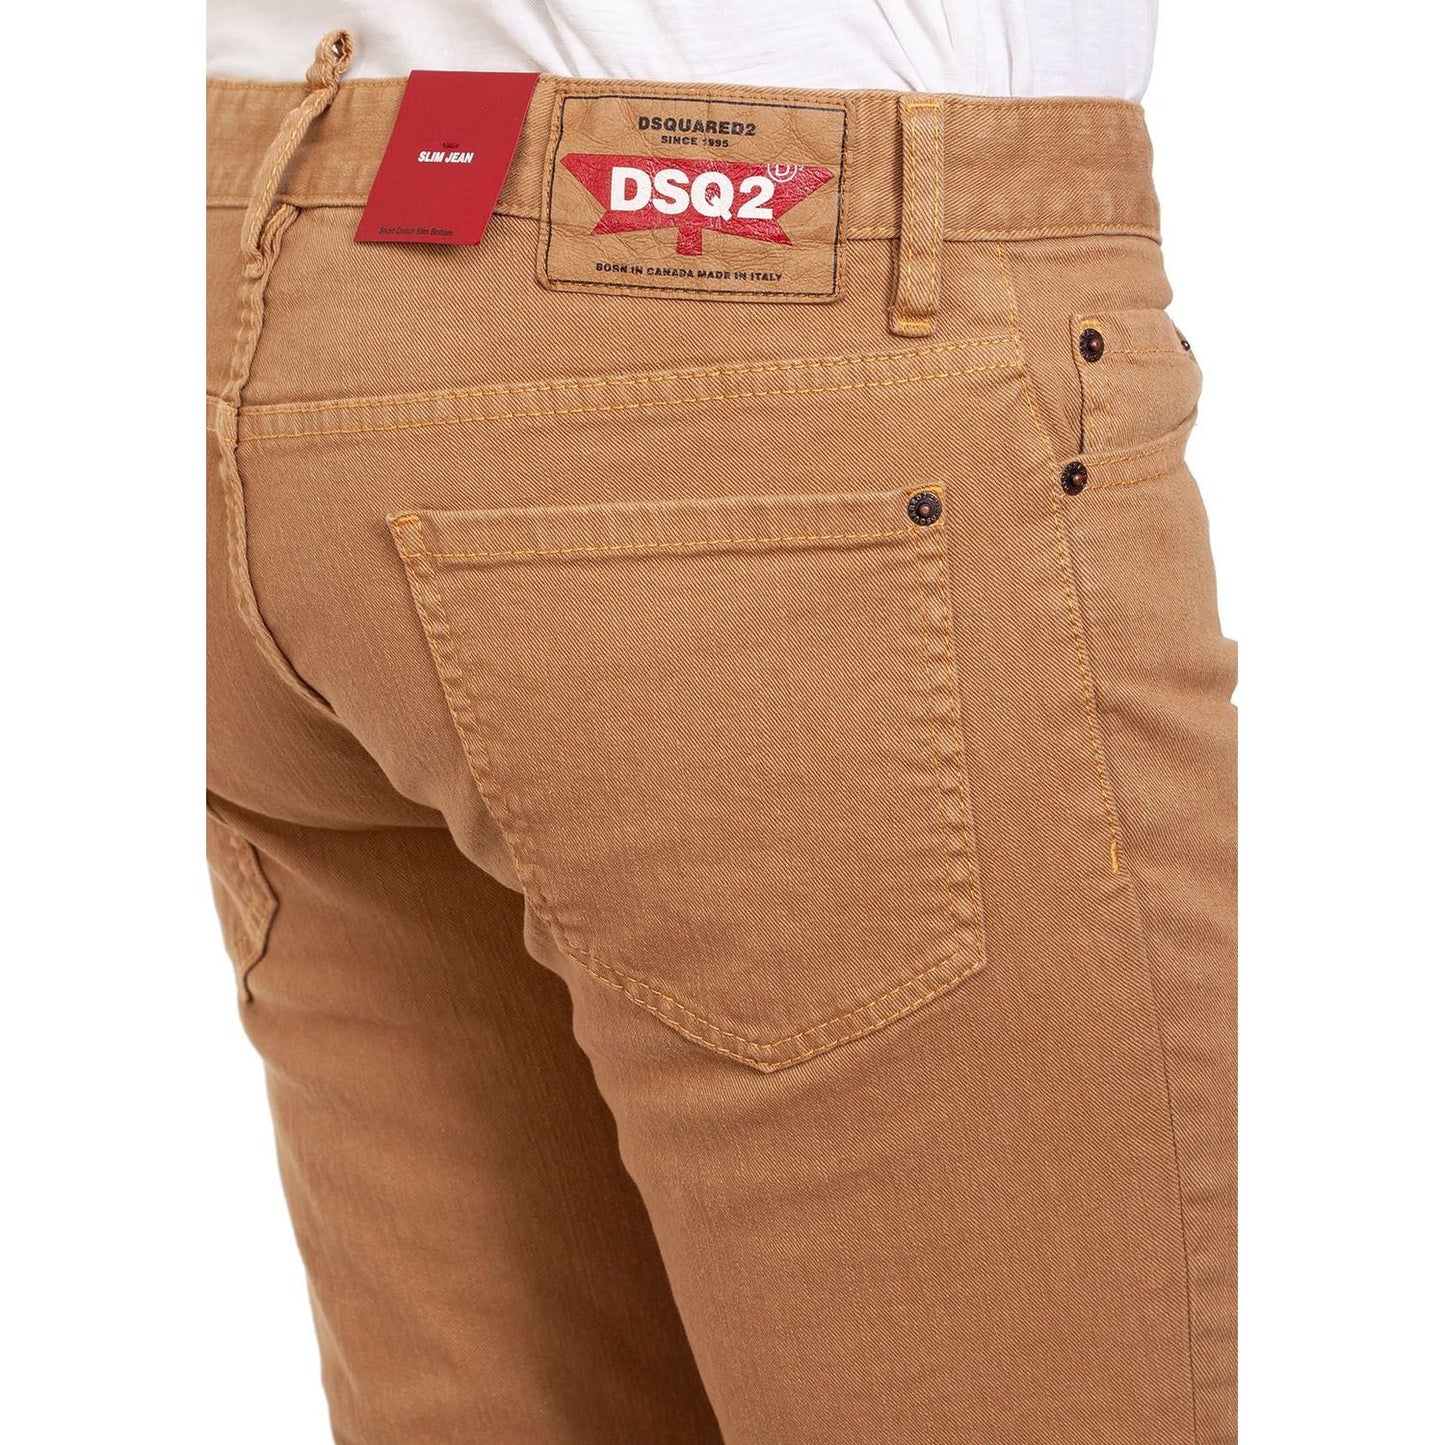 Dsquared² Sleek Brown Denim with Stretch brown-cotton-jeans-pant-4 product-6893-323856149-a433cbfa-52a.jpg